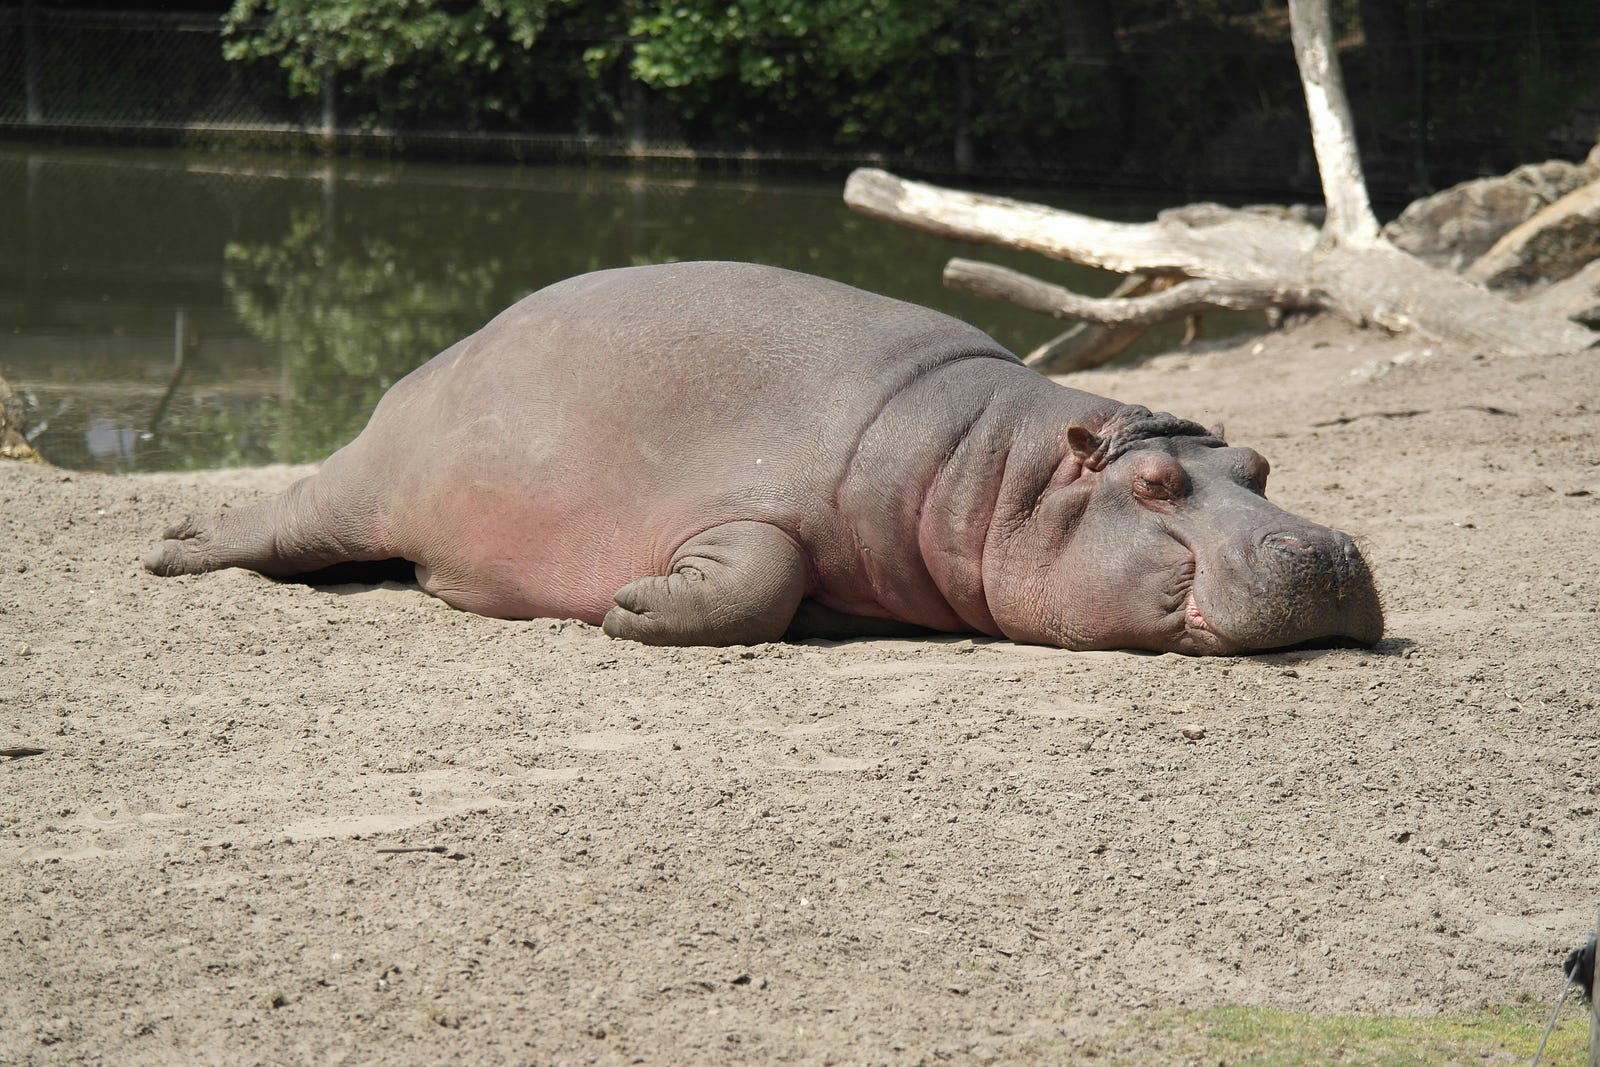 Pablo Escobar Left Many Problems Behind And 99 Hippos is One of Them